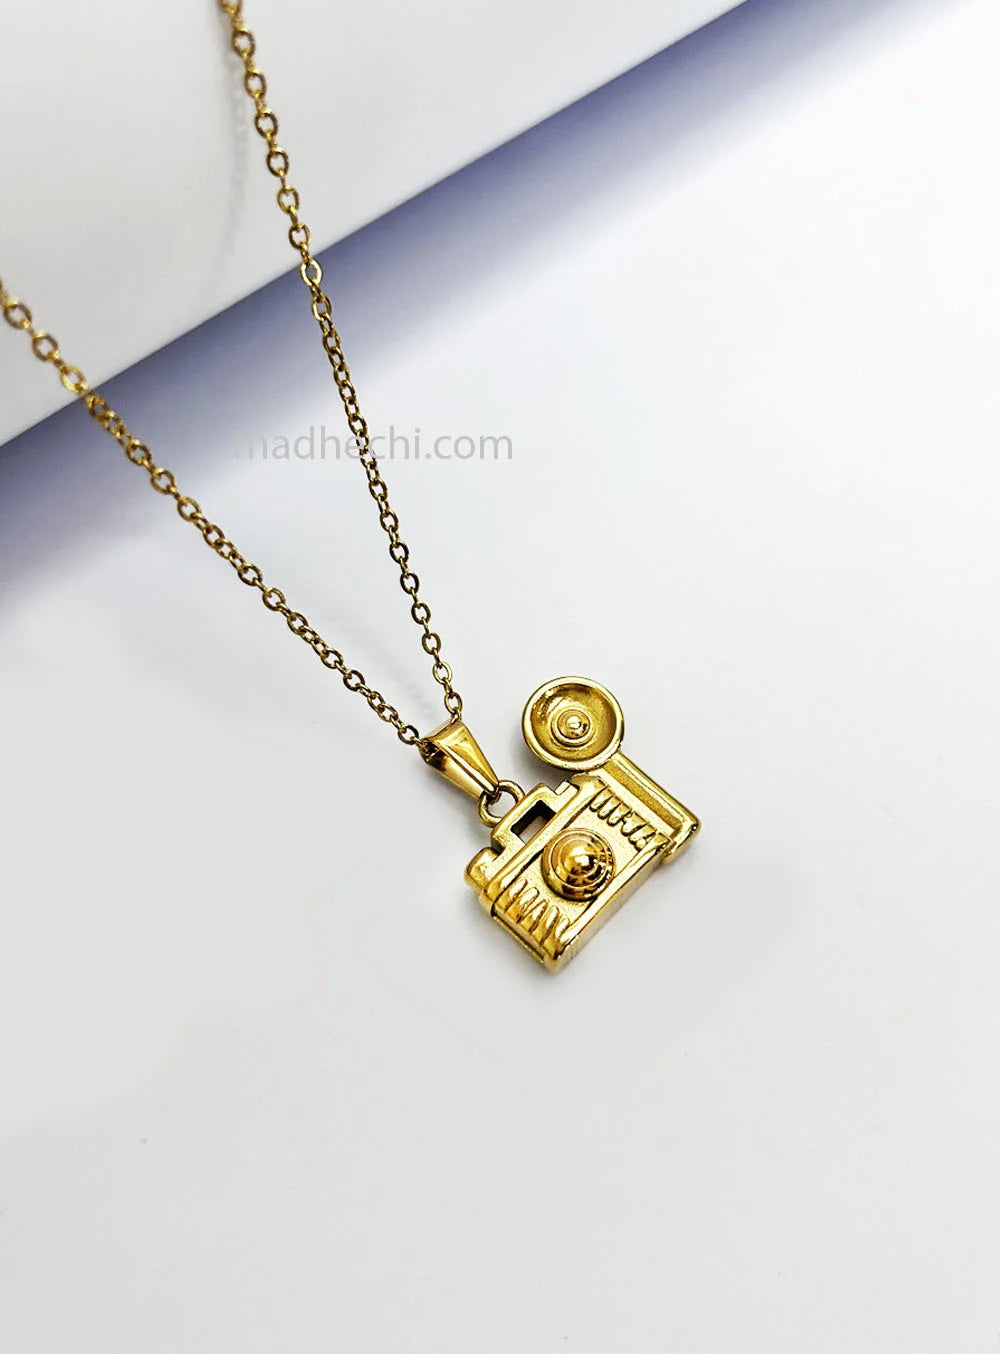 Gold Camera Necklace